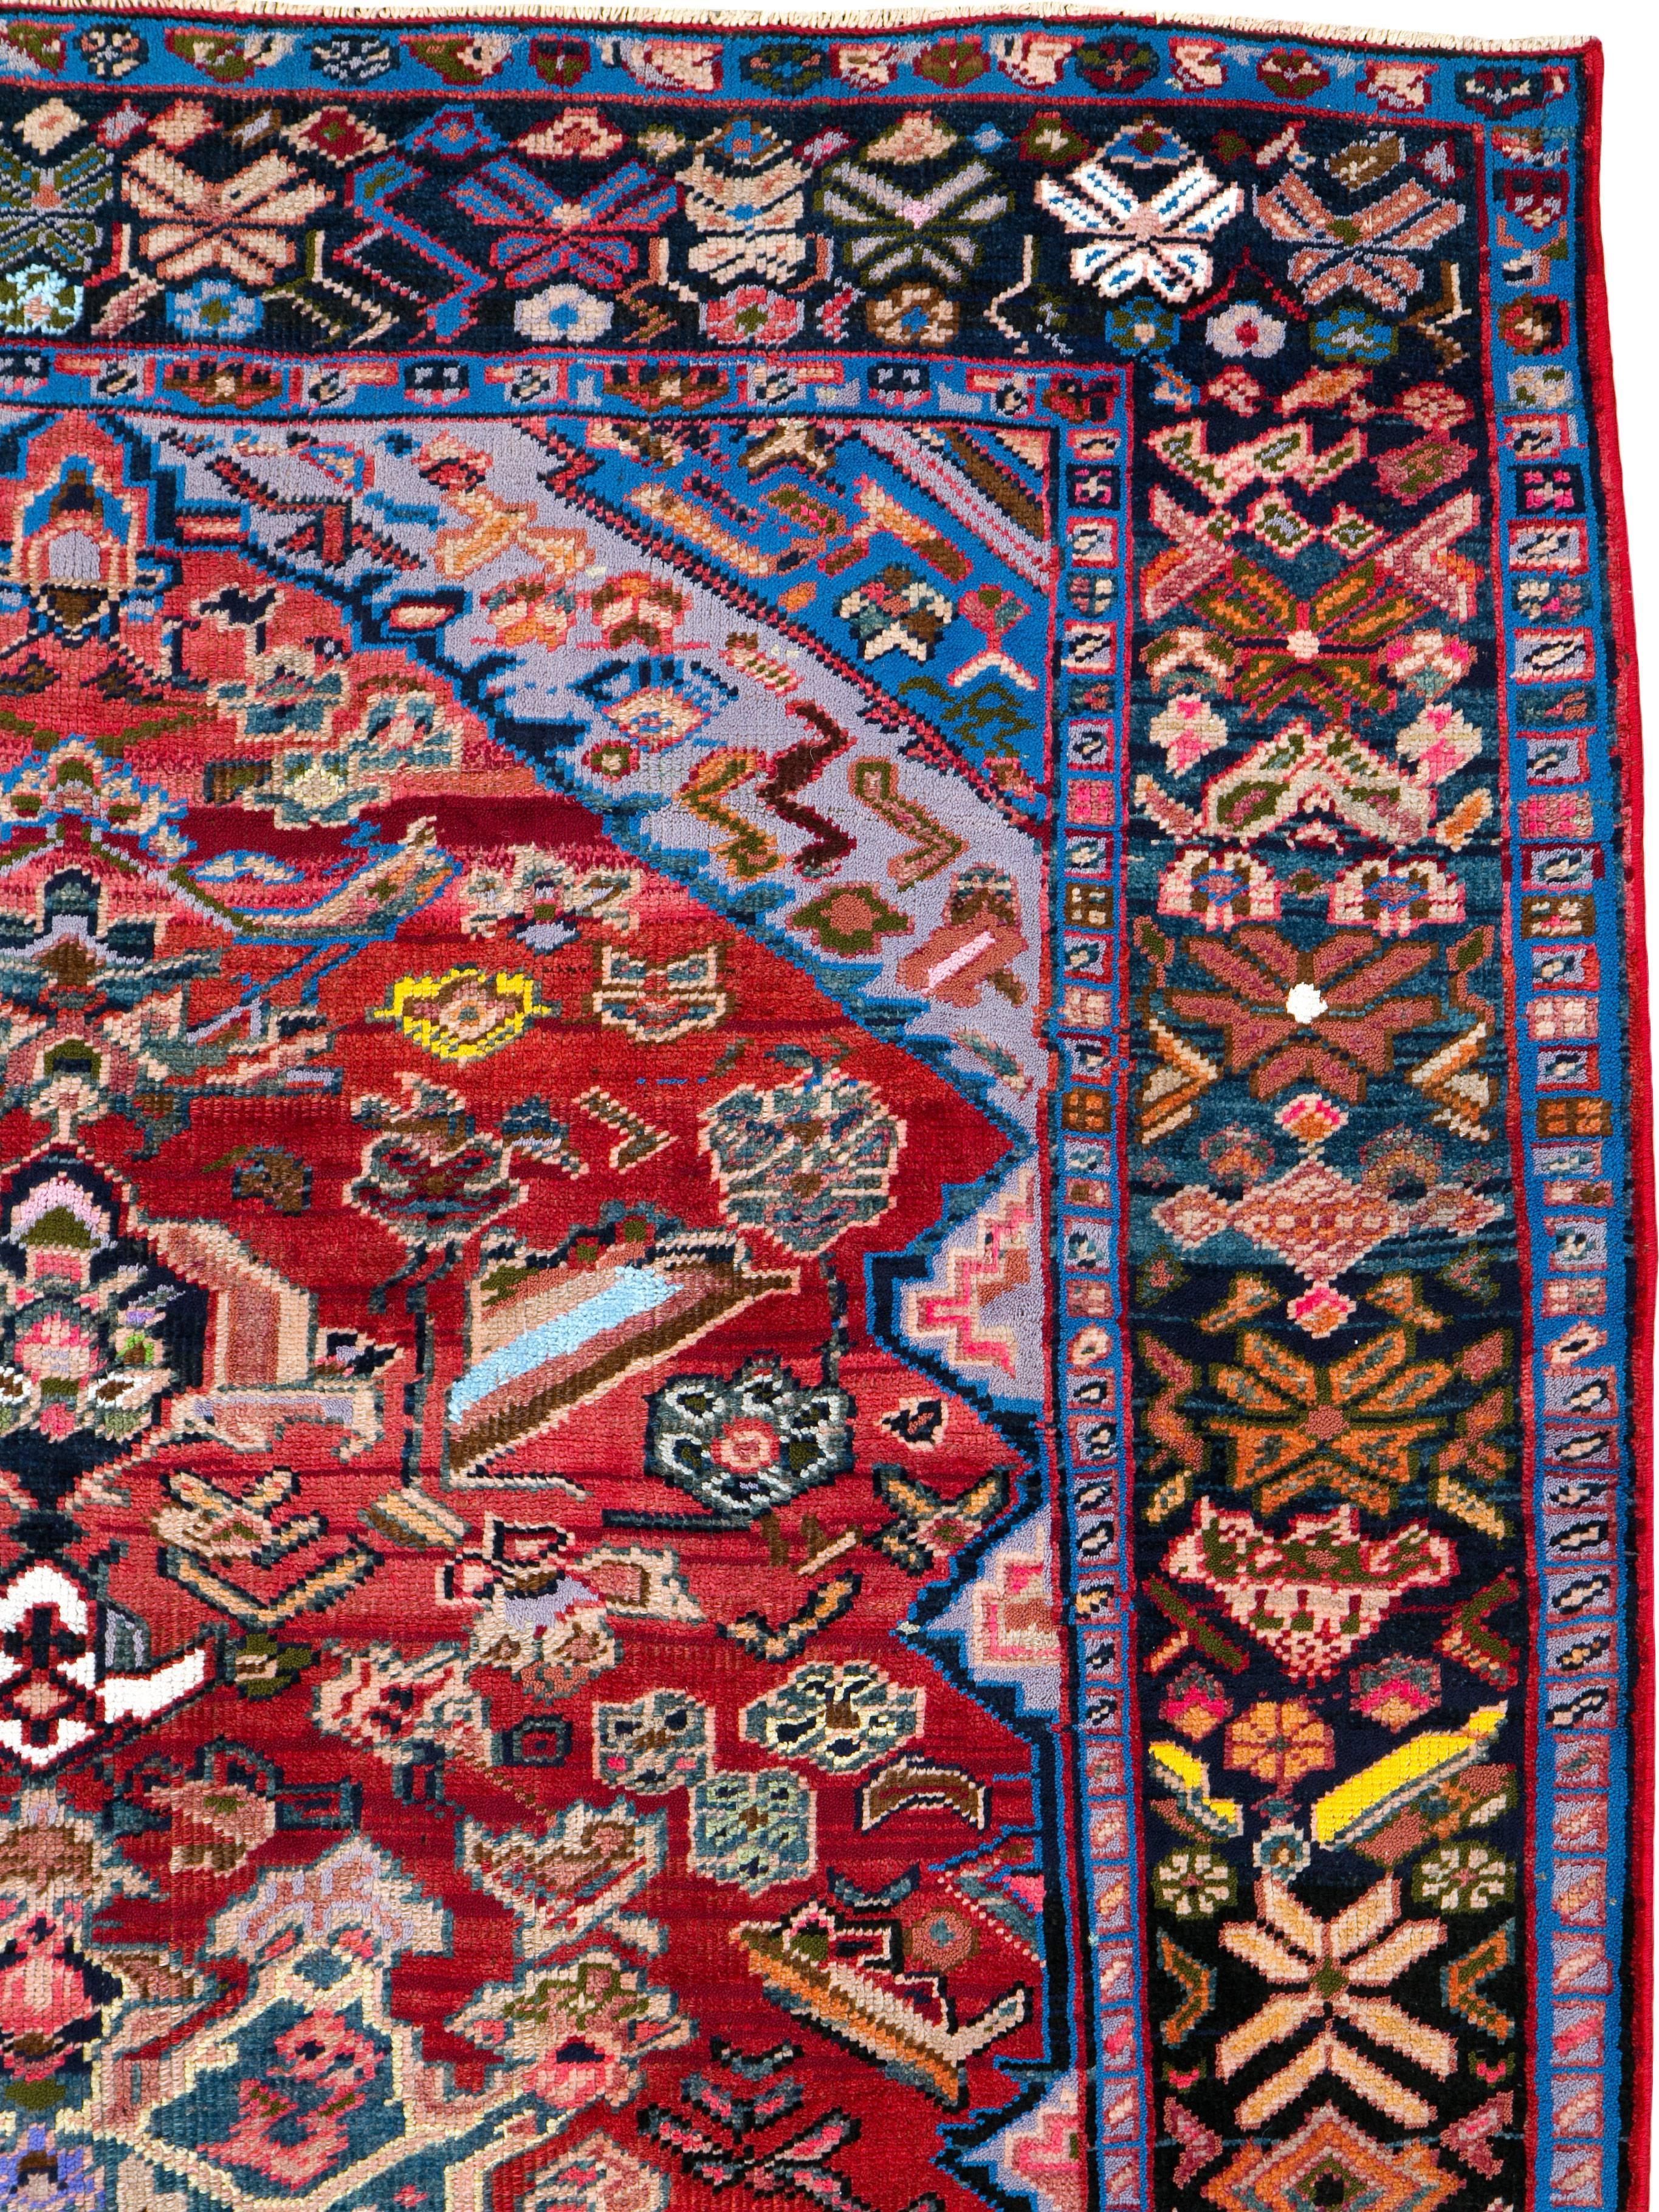 A vintage Persian Bakhtiari rug from the mid-20th century with cotton highlights.